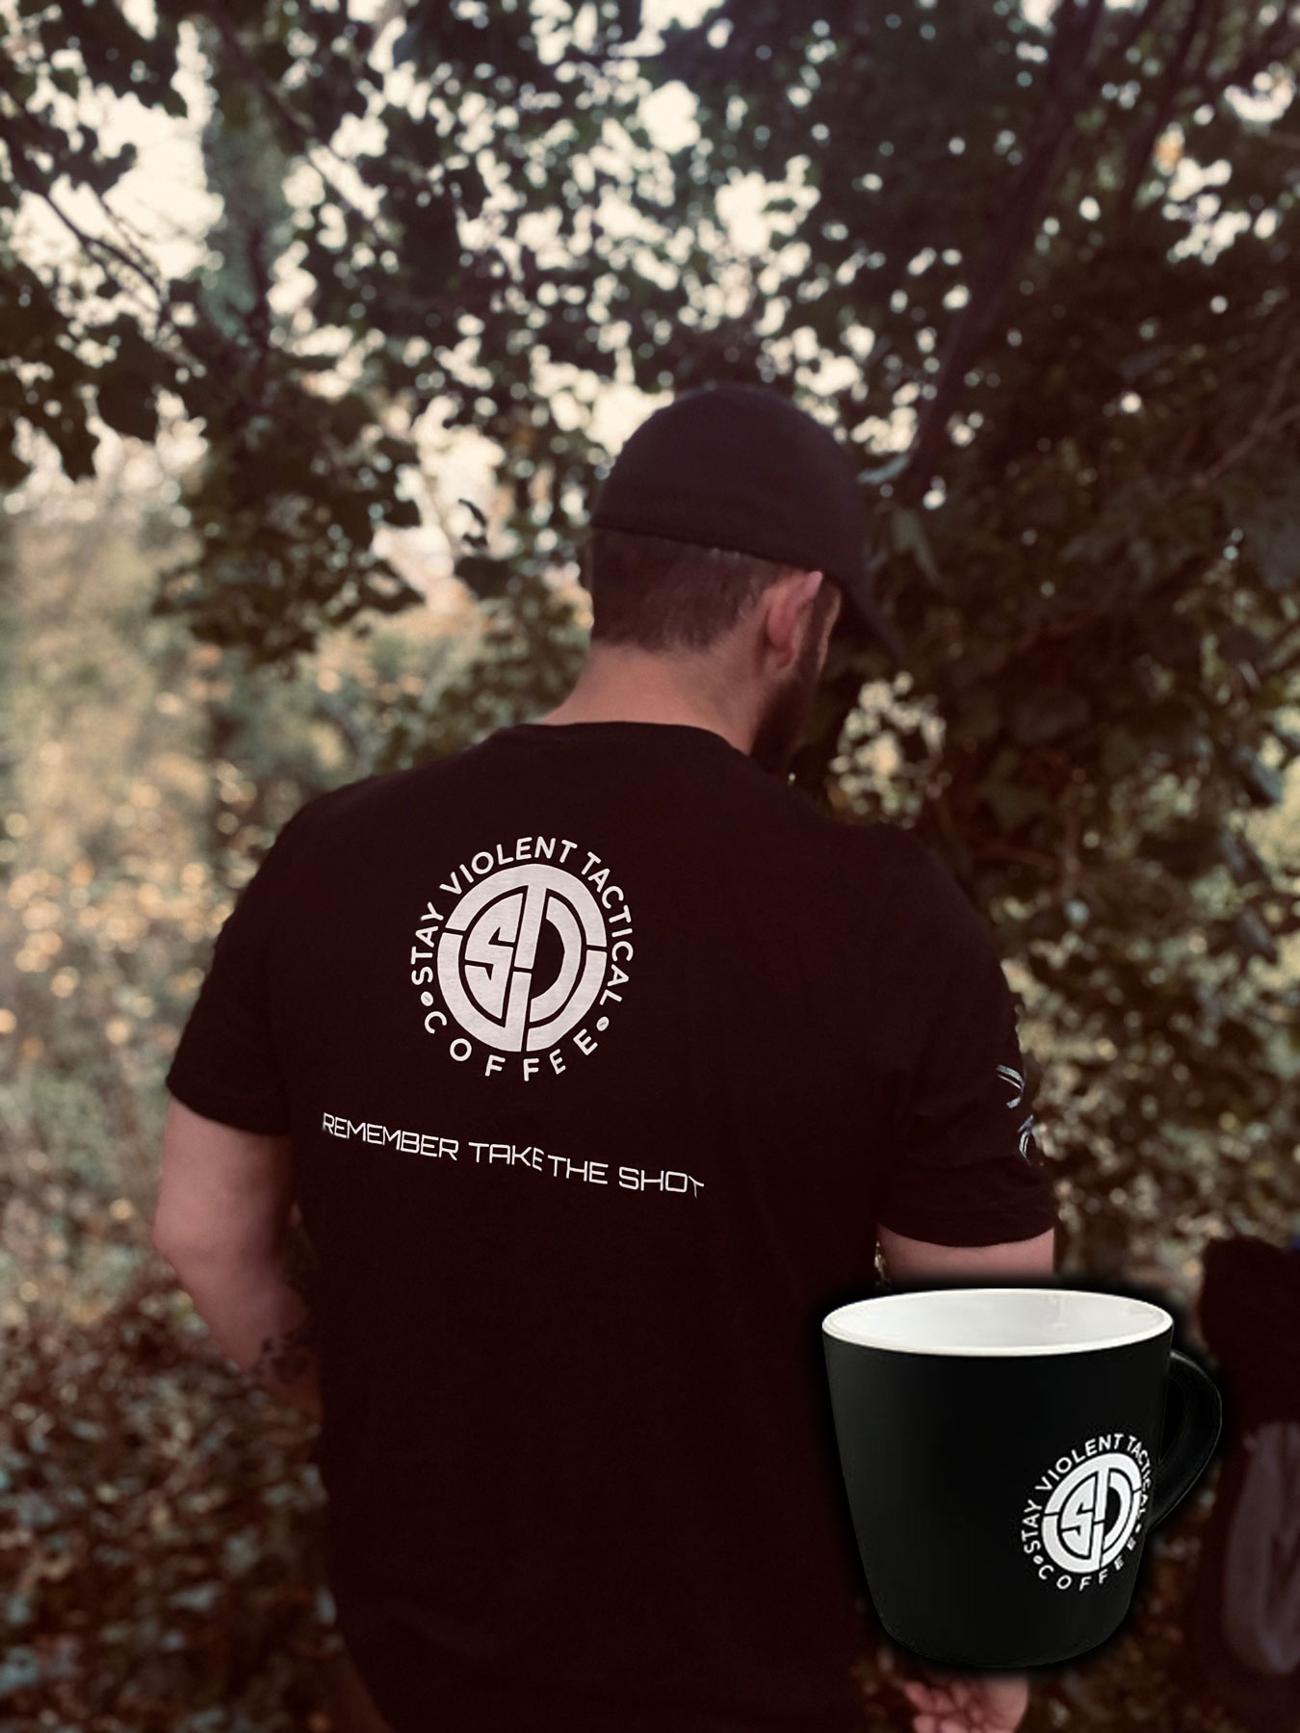 Military Coffee Company | Stay Violent Tactical Coffee gallery image 2